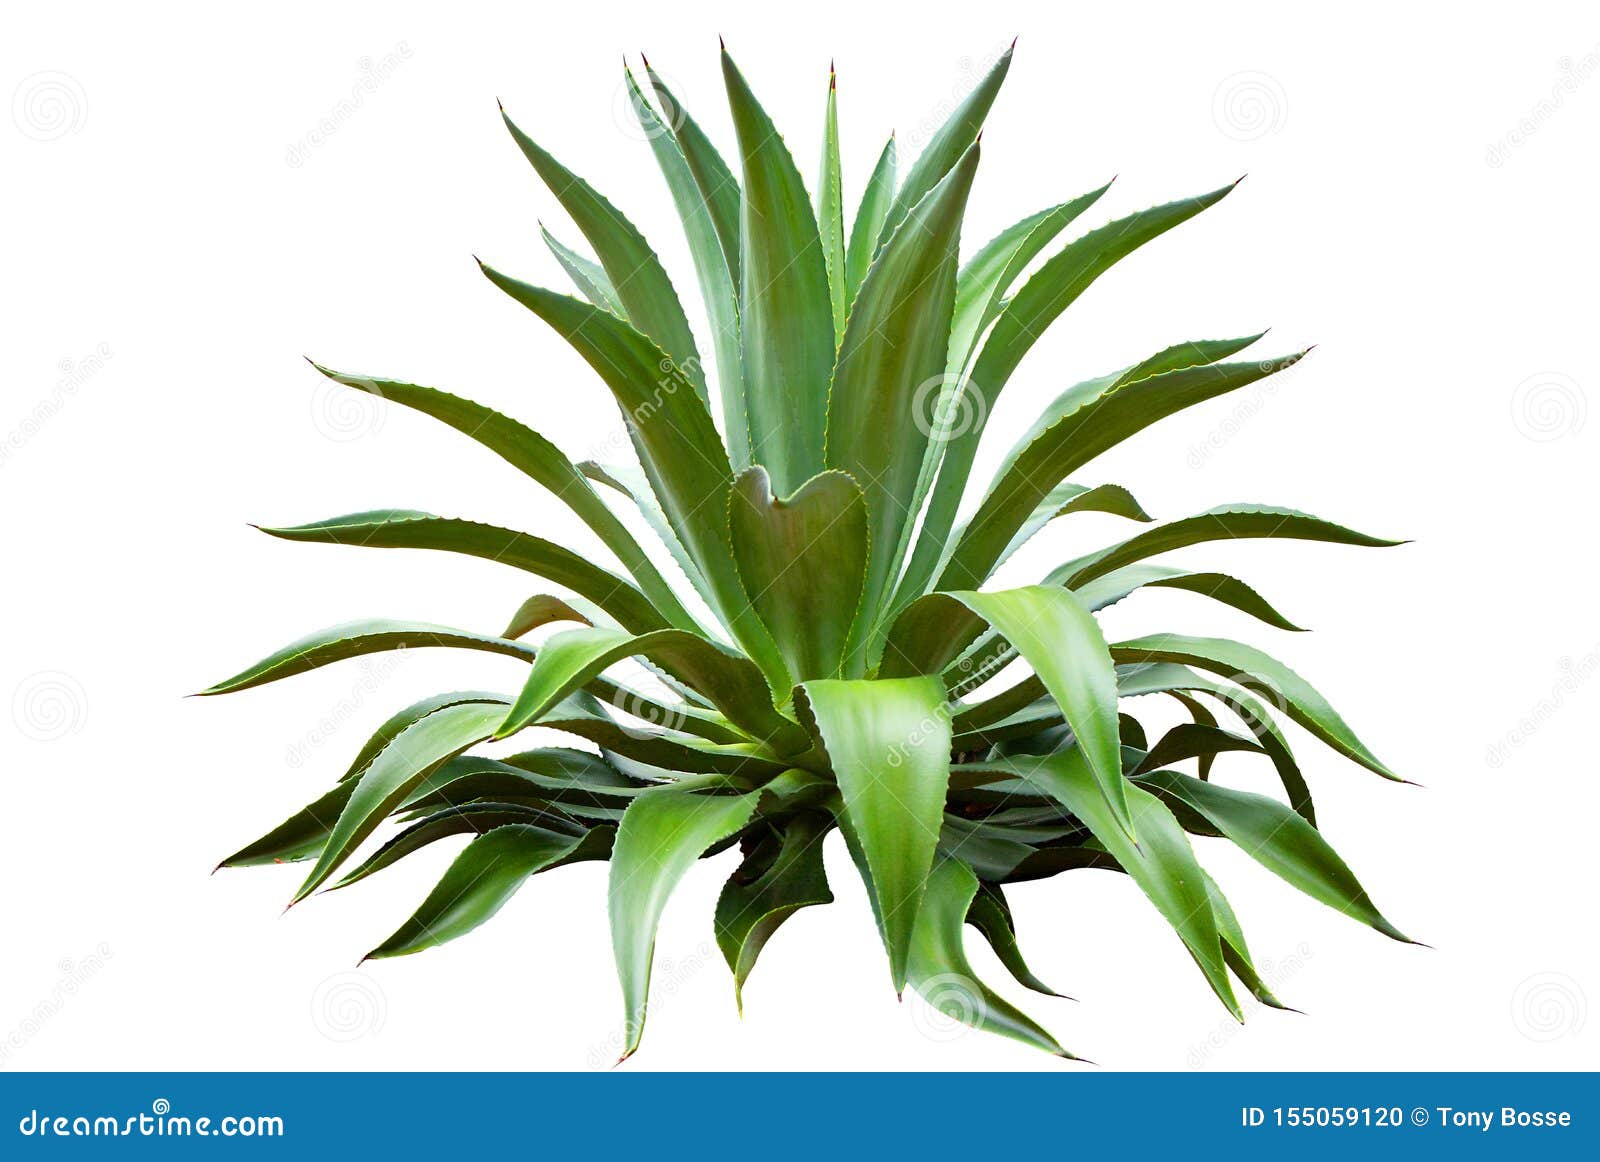 agave plant on white